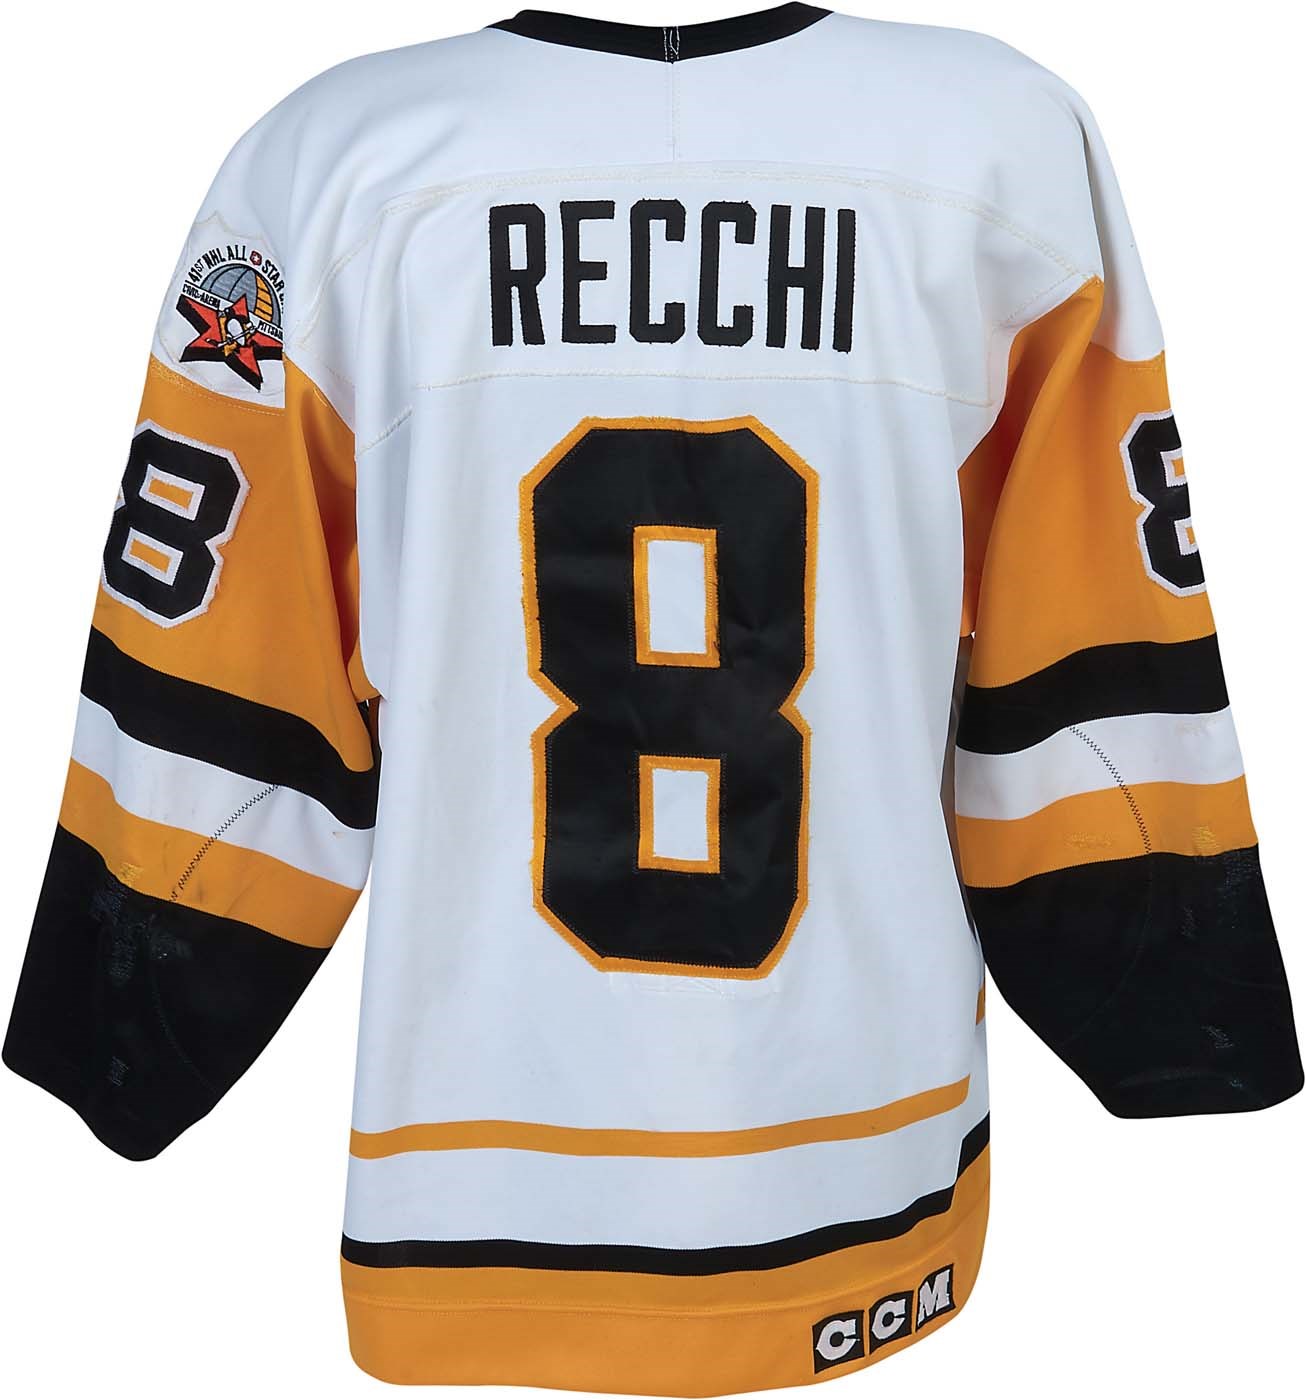 1989-90 Mark Recchi Game Worn Pittsburgh Penguins Rookie Jersey w/All-Star Patch & 26 Team Repairs